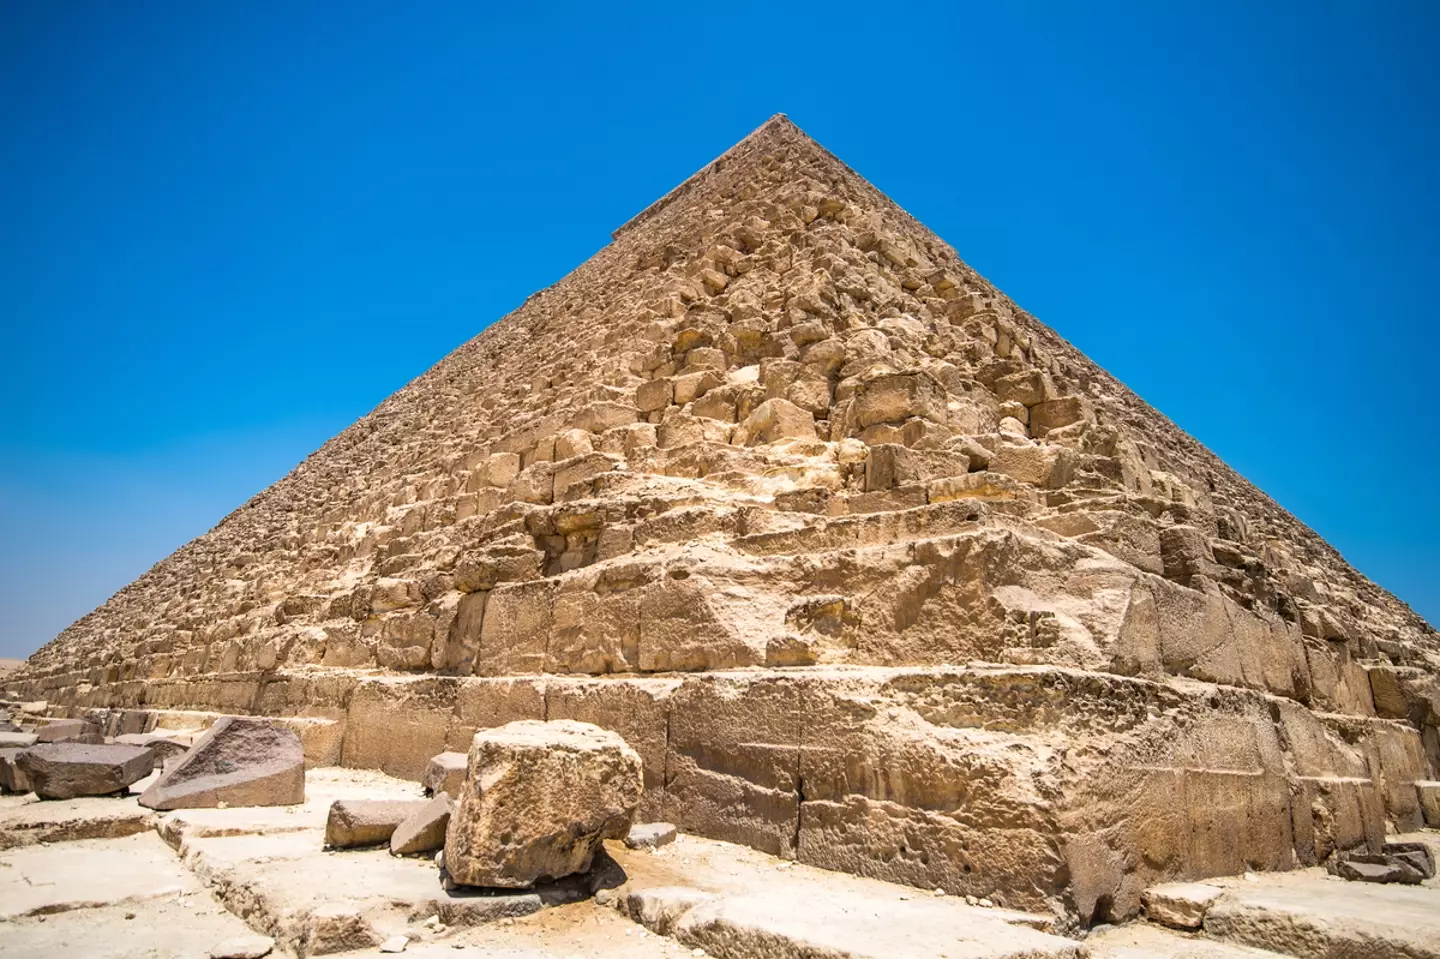 The pyramids at Giza have puzzled historians for centuries.